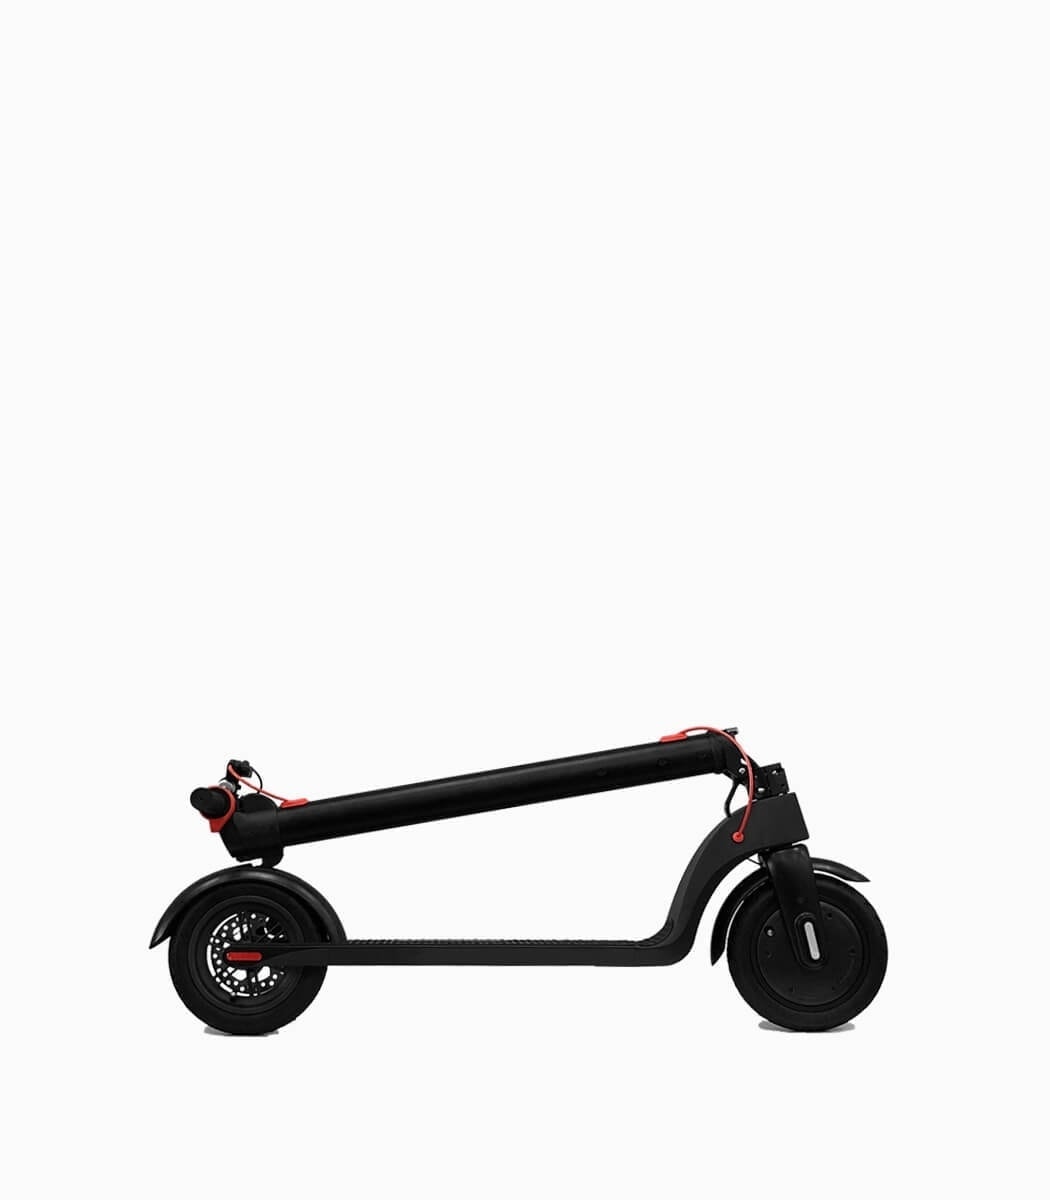 MOBOT X7 (BLACK6.4AH) UL2272 electric scooter folded right